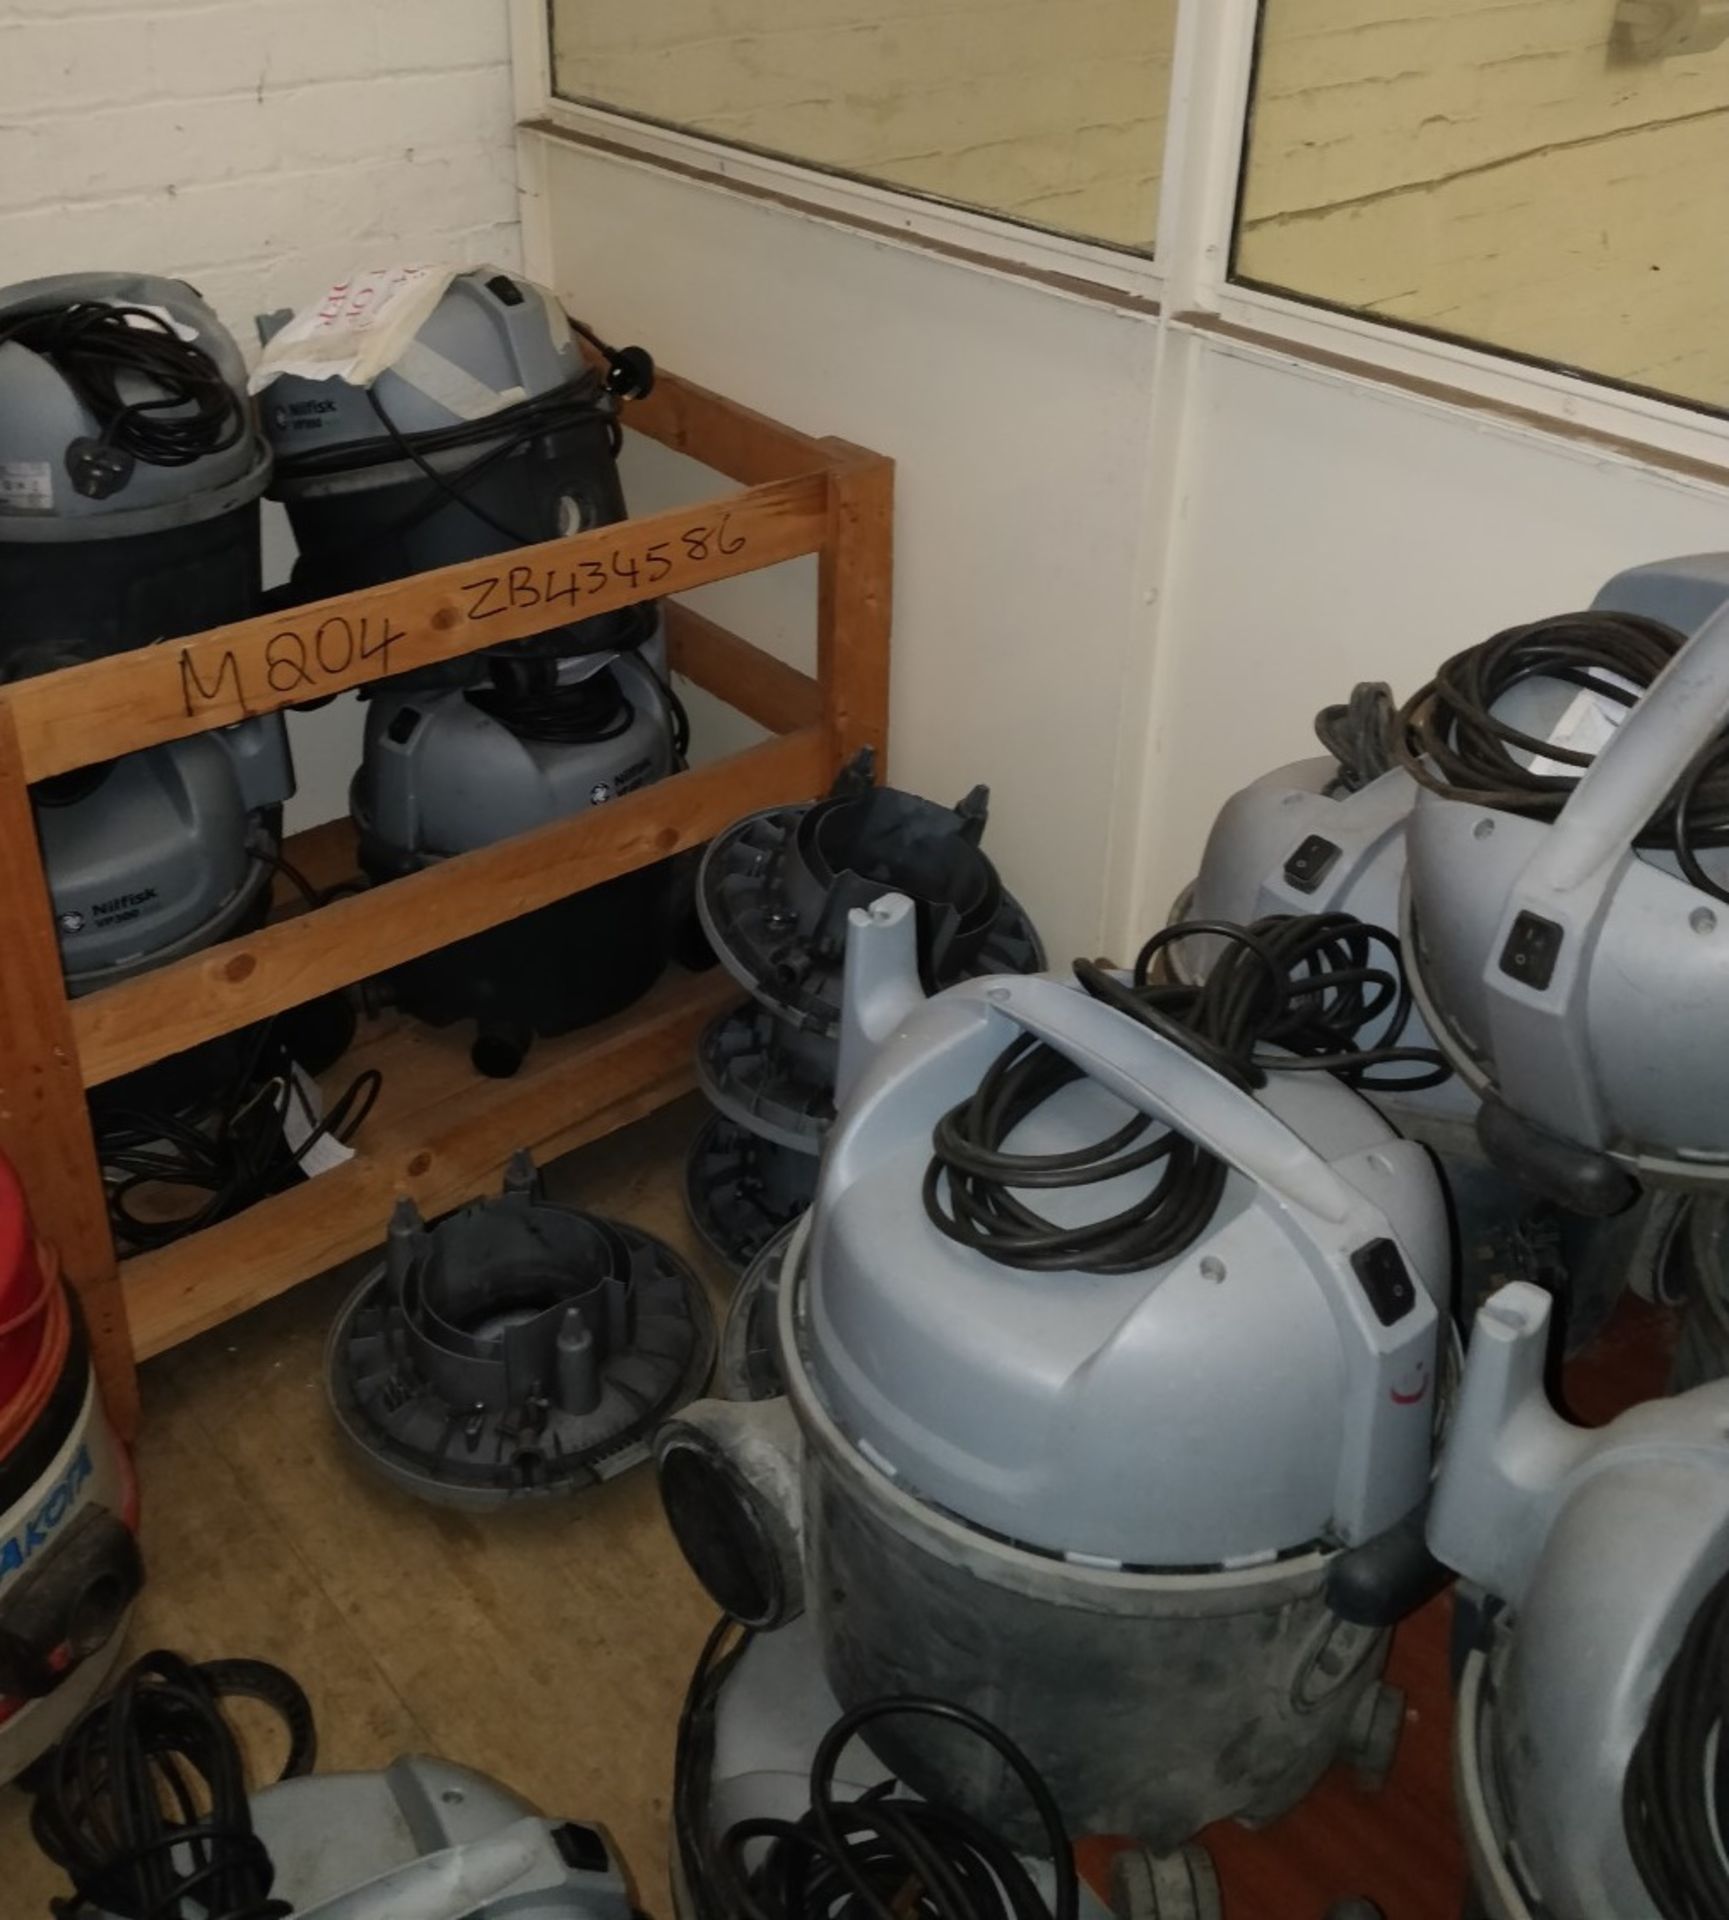 30 x Nilfrisk VP300 Eco Vacuum Cleaners - Approx RRP £3,000 - Ref B2 CL409 - Location: Wakefield - Image 5 of 5